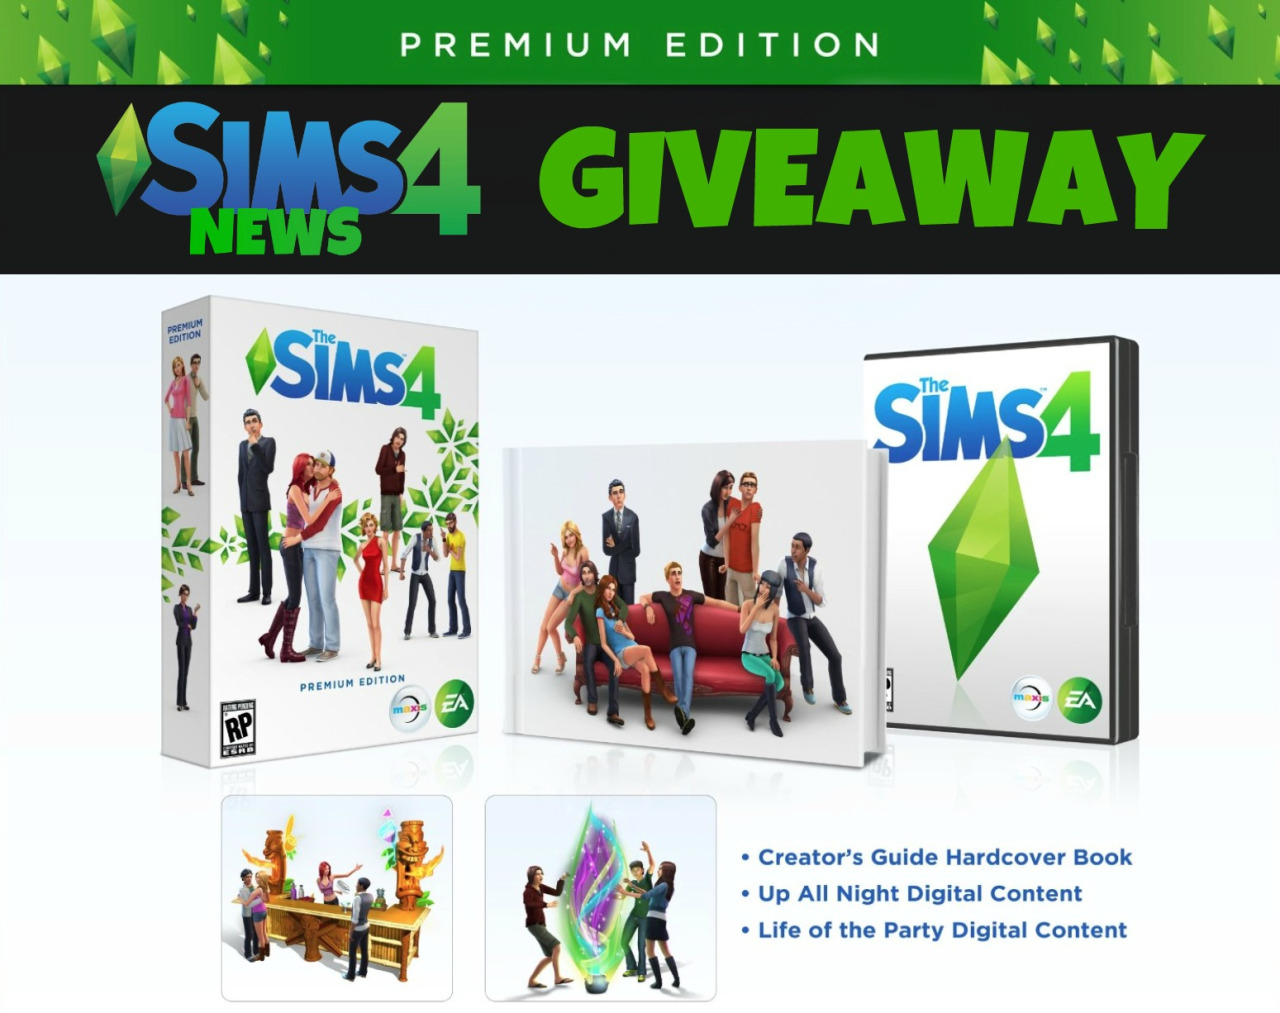 As a gift to my amaaaazing followers, I&rsquo;m giving away one copy of The Sims 4 PREMIUM EDITION! Wooo!
On January 8th, I will choose one random person who has reblogged this post. If they are also following Sims4News, they will receive a free copy of The Sims 4 Premium Edition.
So just reblog (don&rsquo;t just &ldquo;like&rdquo;) this post and follow if you haven&rsquo;t already!
Follow my personal blog for a chance to win a mystery prize! :)
Good luck guys, love ya!